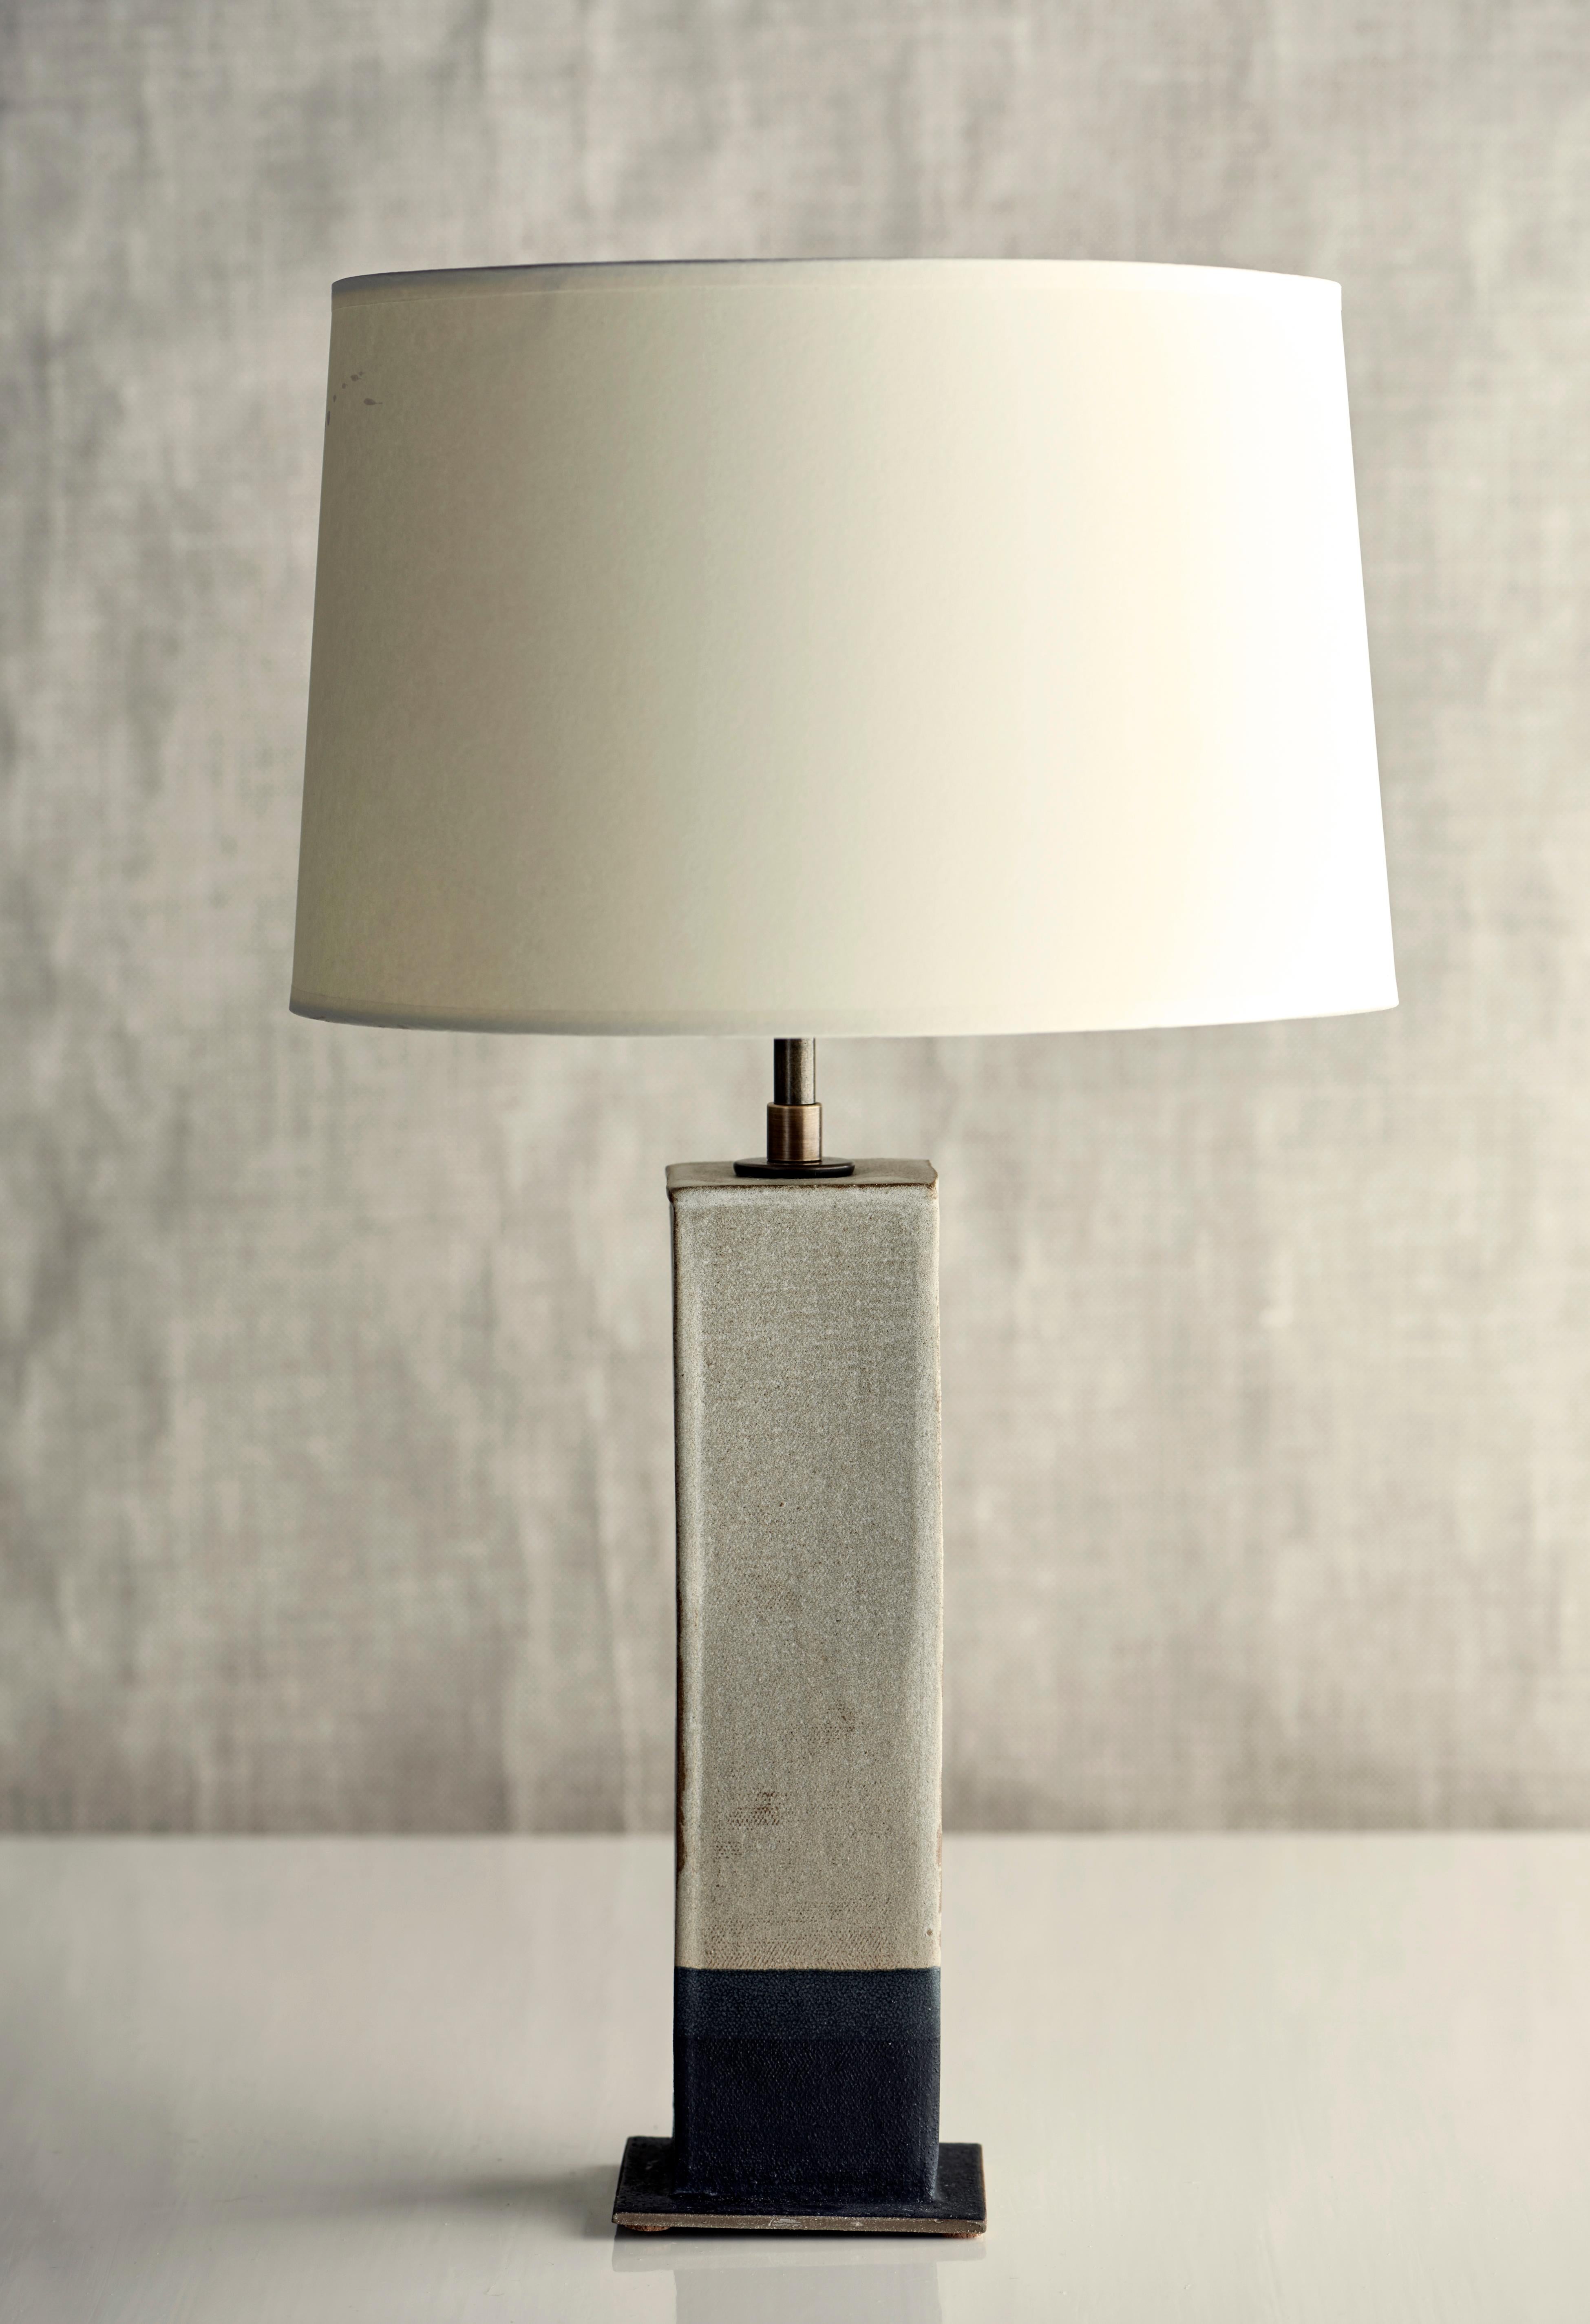 Fired Sag Harbor Lamp, Ceramic Sculptural Table Lamp by Dumais Made